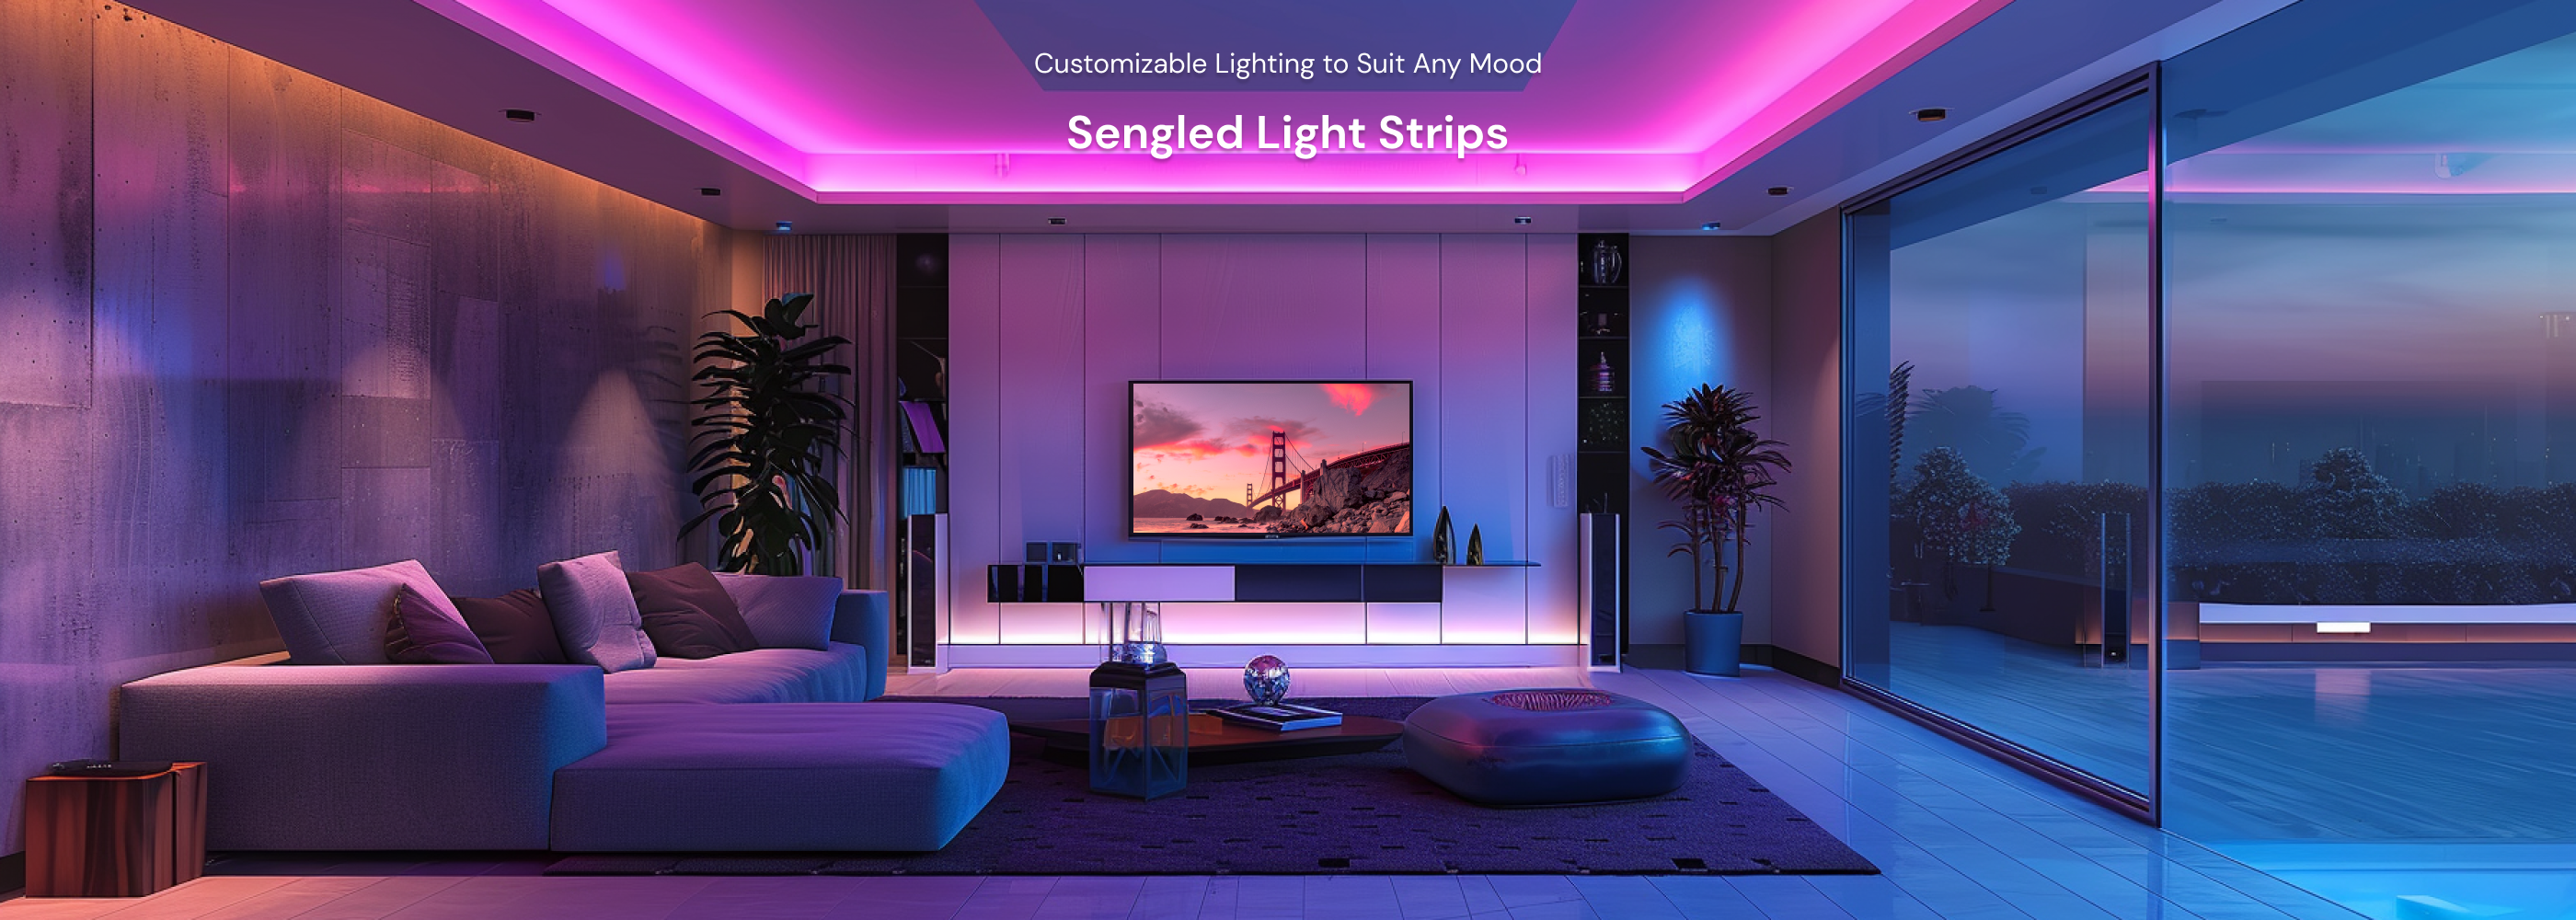 Sengled Smart LED Light Strips:  Elevate your living spaces with Sengled Smart LED Light Strips. Customize bright, vibrant lighting for TVs, bedrooms, kitchens, workshops and more. Easily integrate with Alexa, Google, and SmartThings. Sengled's high-quality LEDs provide energy-efficient, long-lasting illumination for your smart home.  Keywords: led lights for tv, sengled, bedroom wall lights, led ceiling light, kitchen ceiling lights, led shop lights